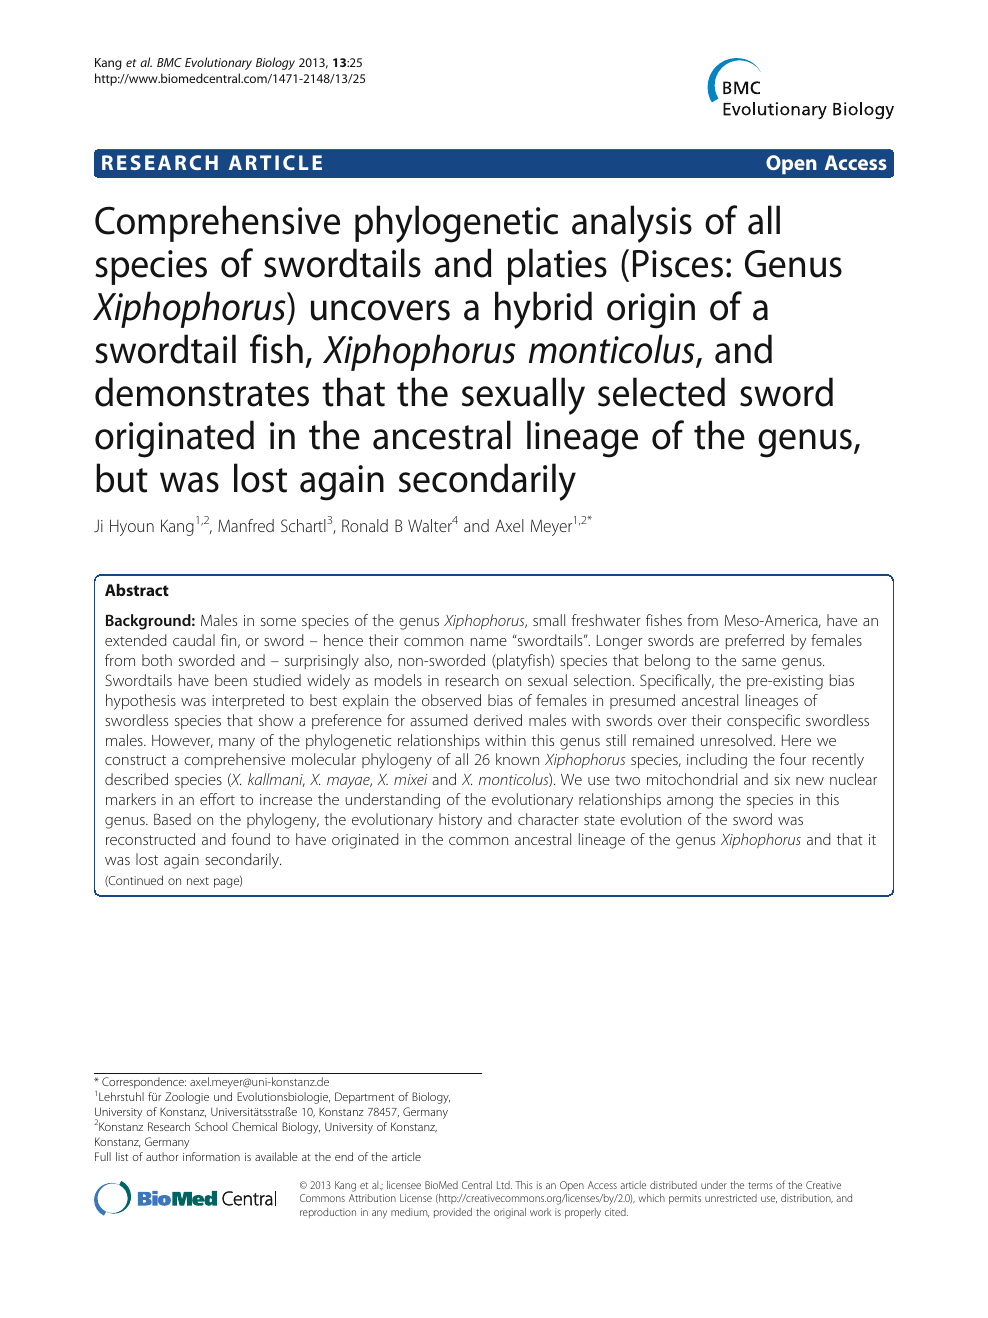 Comprehensive Phylogenetic Analysis Of All Species Of Swordtails And Platies Pisces Genus Xiphophorus Uncovers A Hybrid Origin Of A Swordtail Fish Xiphophorus Monticolus And Demonstrates That The Sexually Selected Sword Originated In